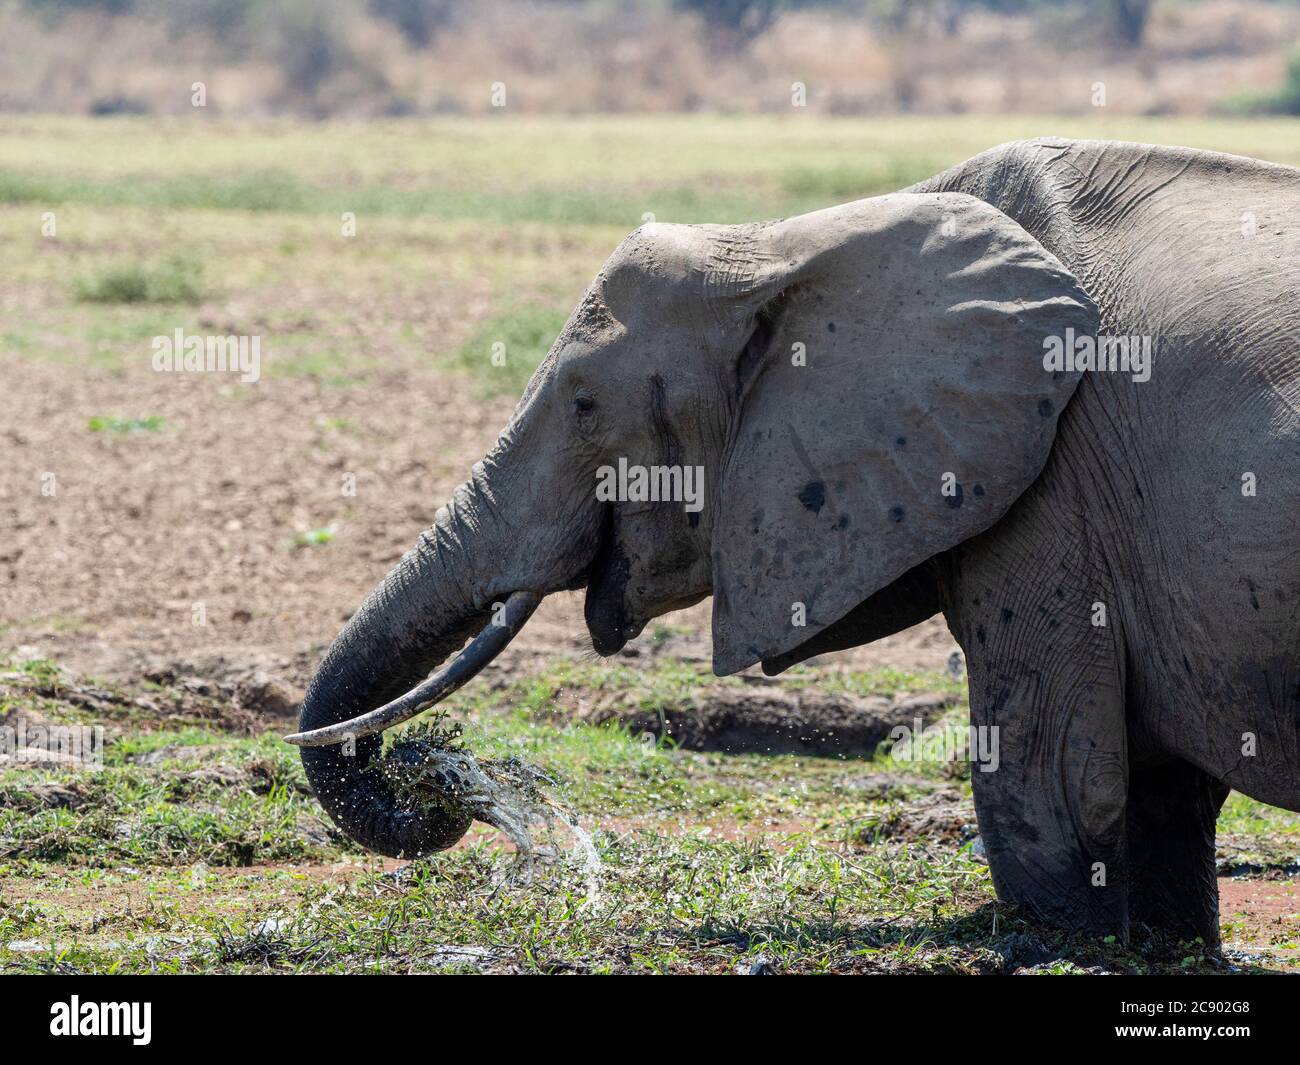 An African bush elephant, Loxodonta africana, at a watering hole in South Luangwa National Park, Zambia. Stock Photo